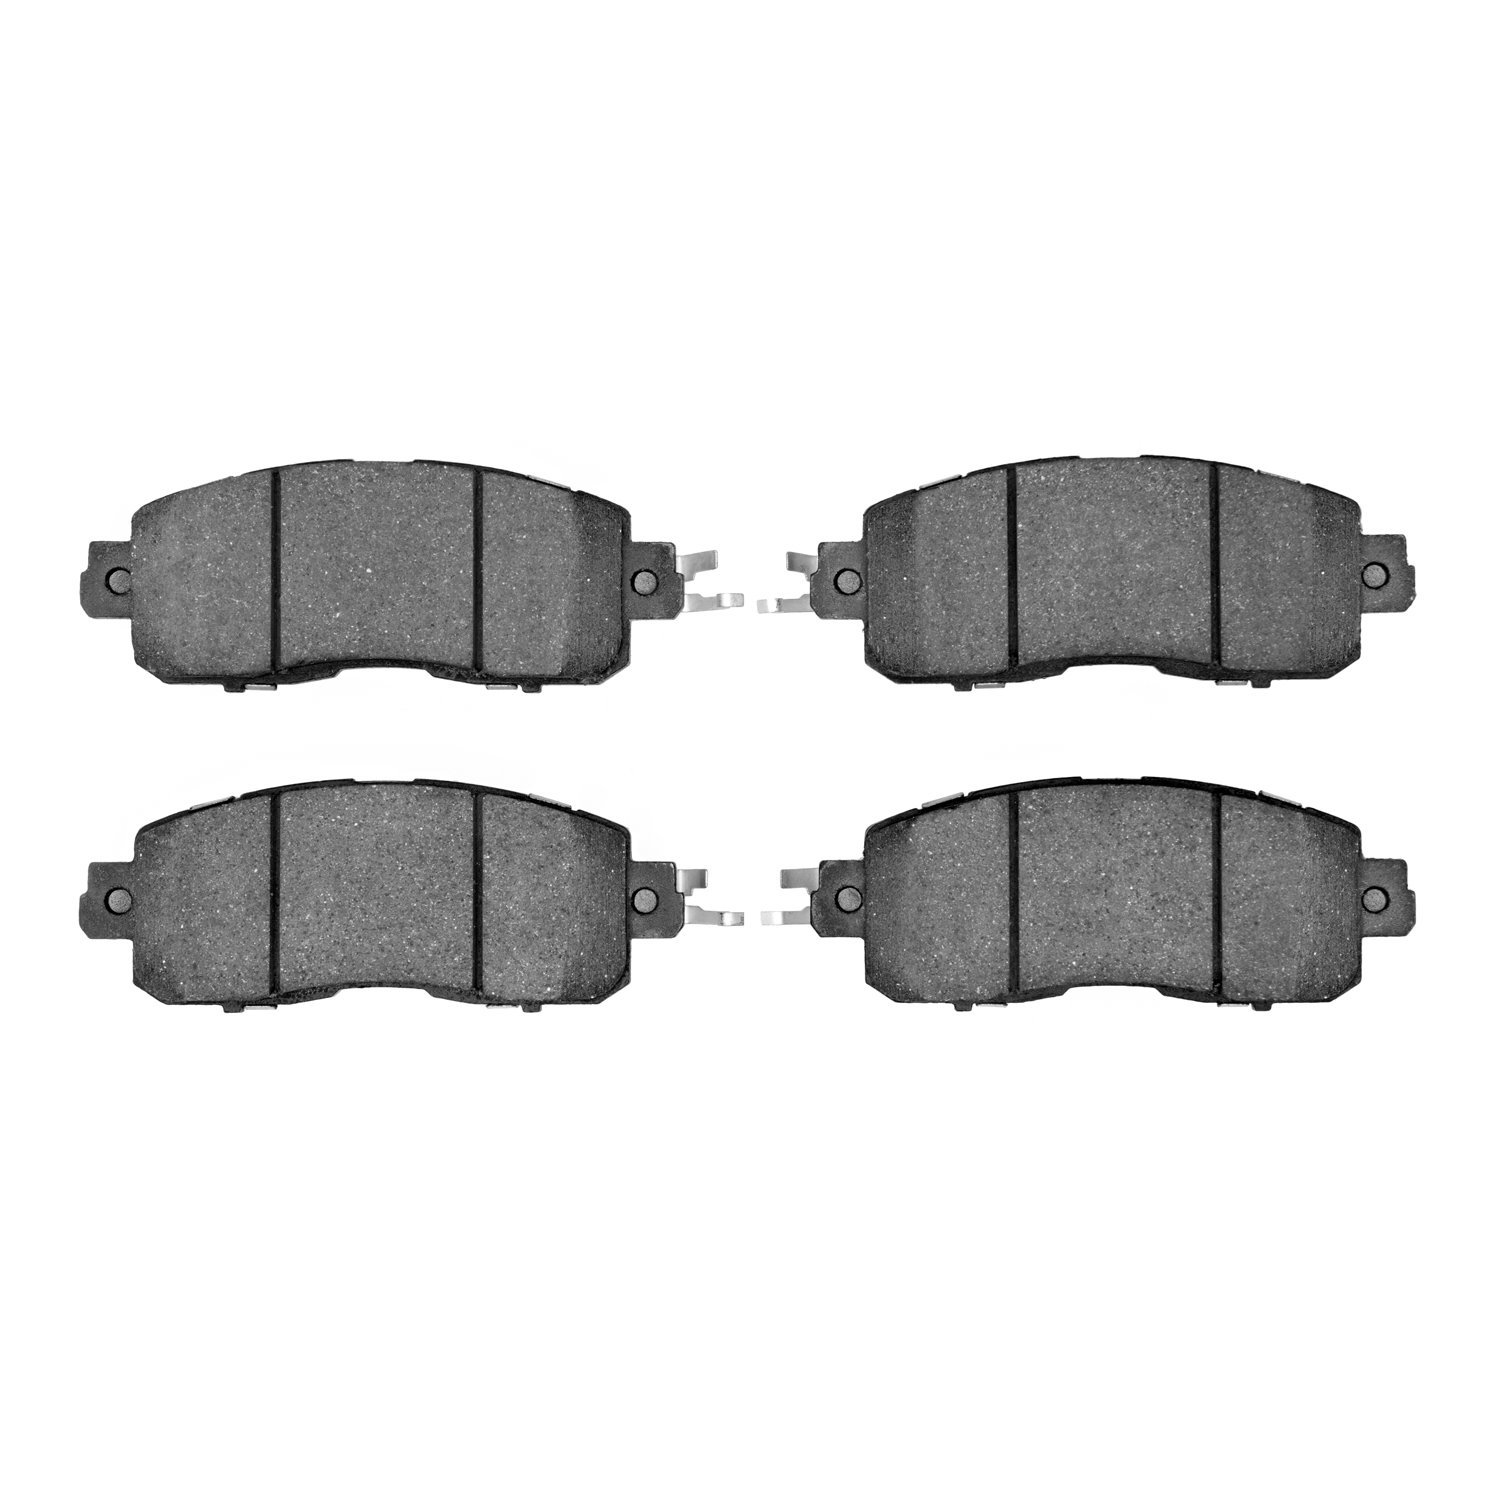 1310-1650-00 3000-Series Ceramic Brake Pads, Fits Select Infiniti/Nissan, Position: Front